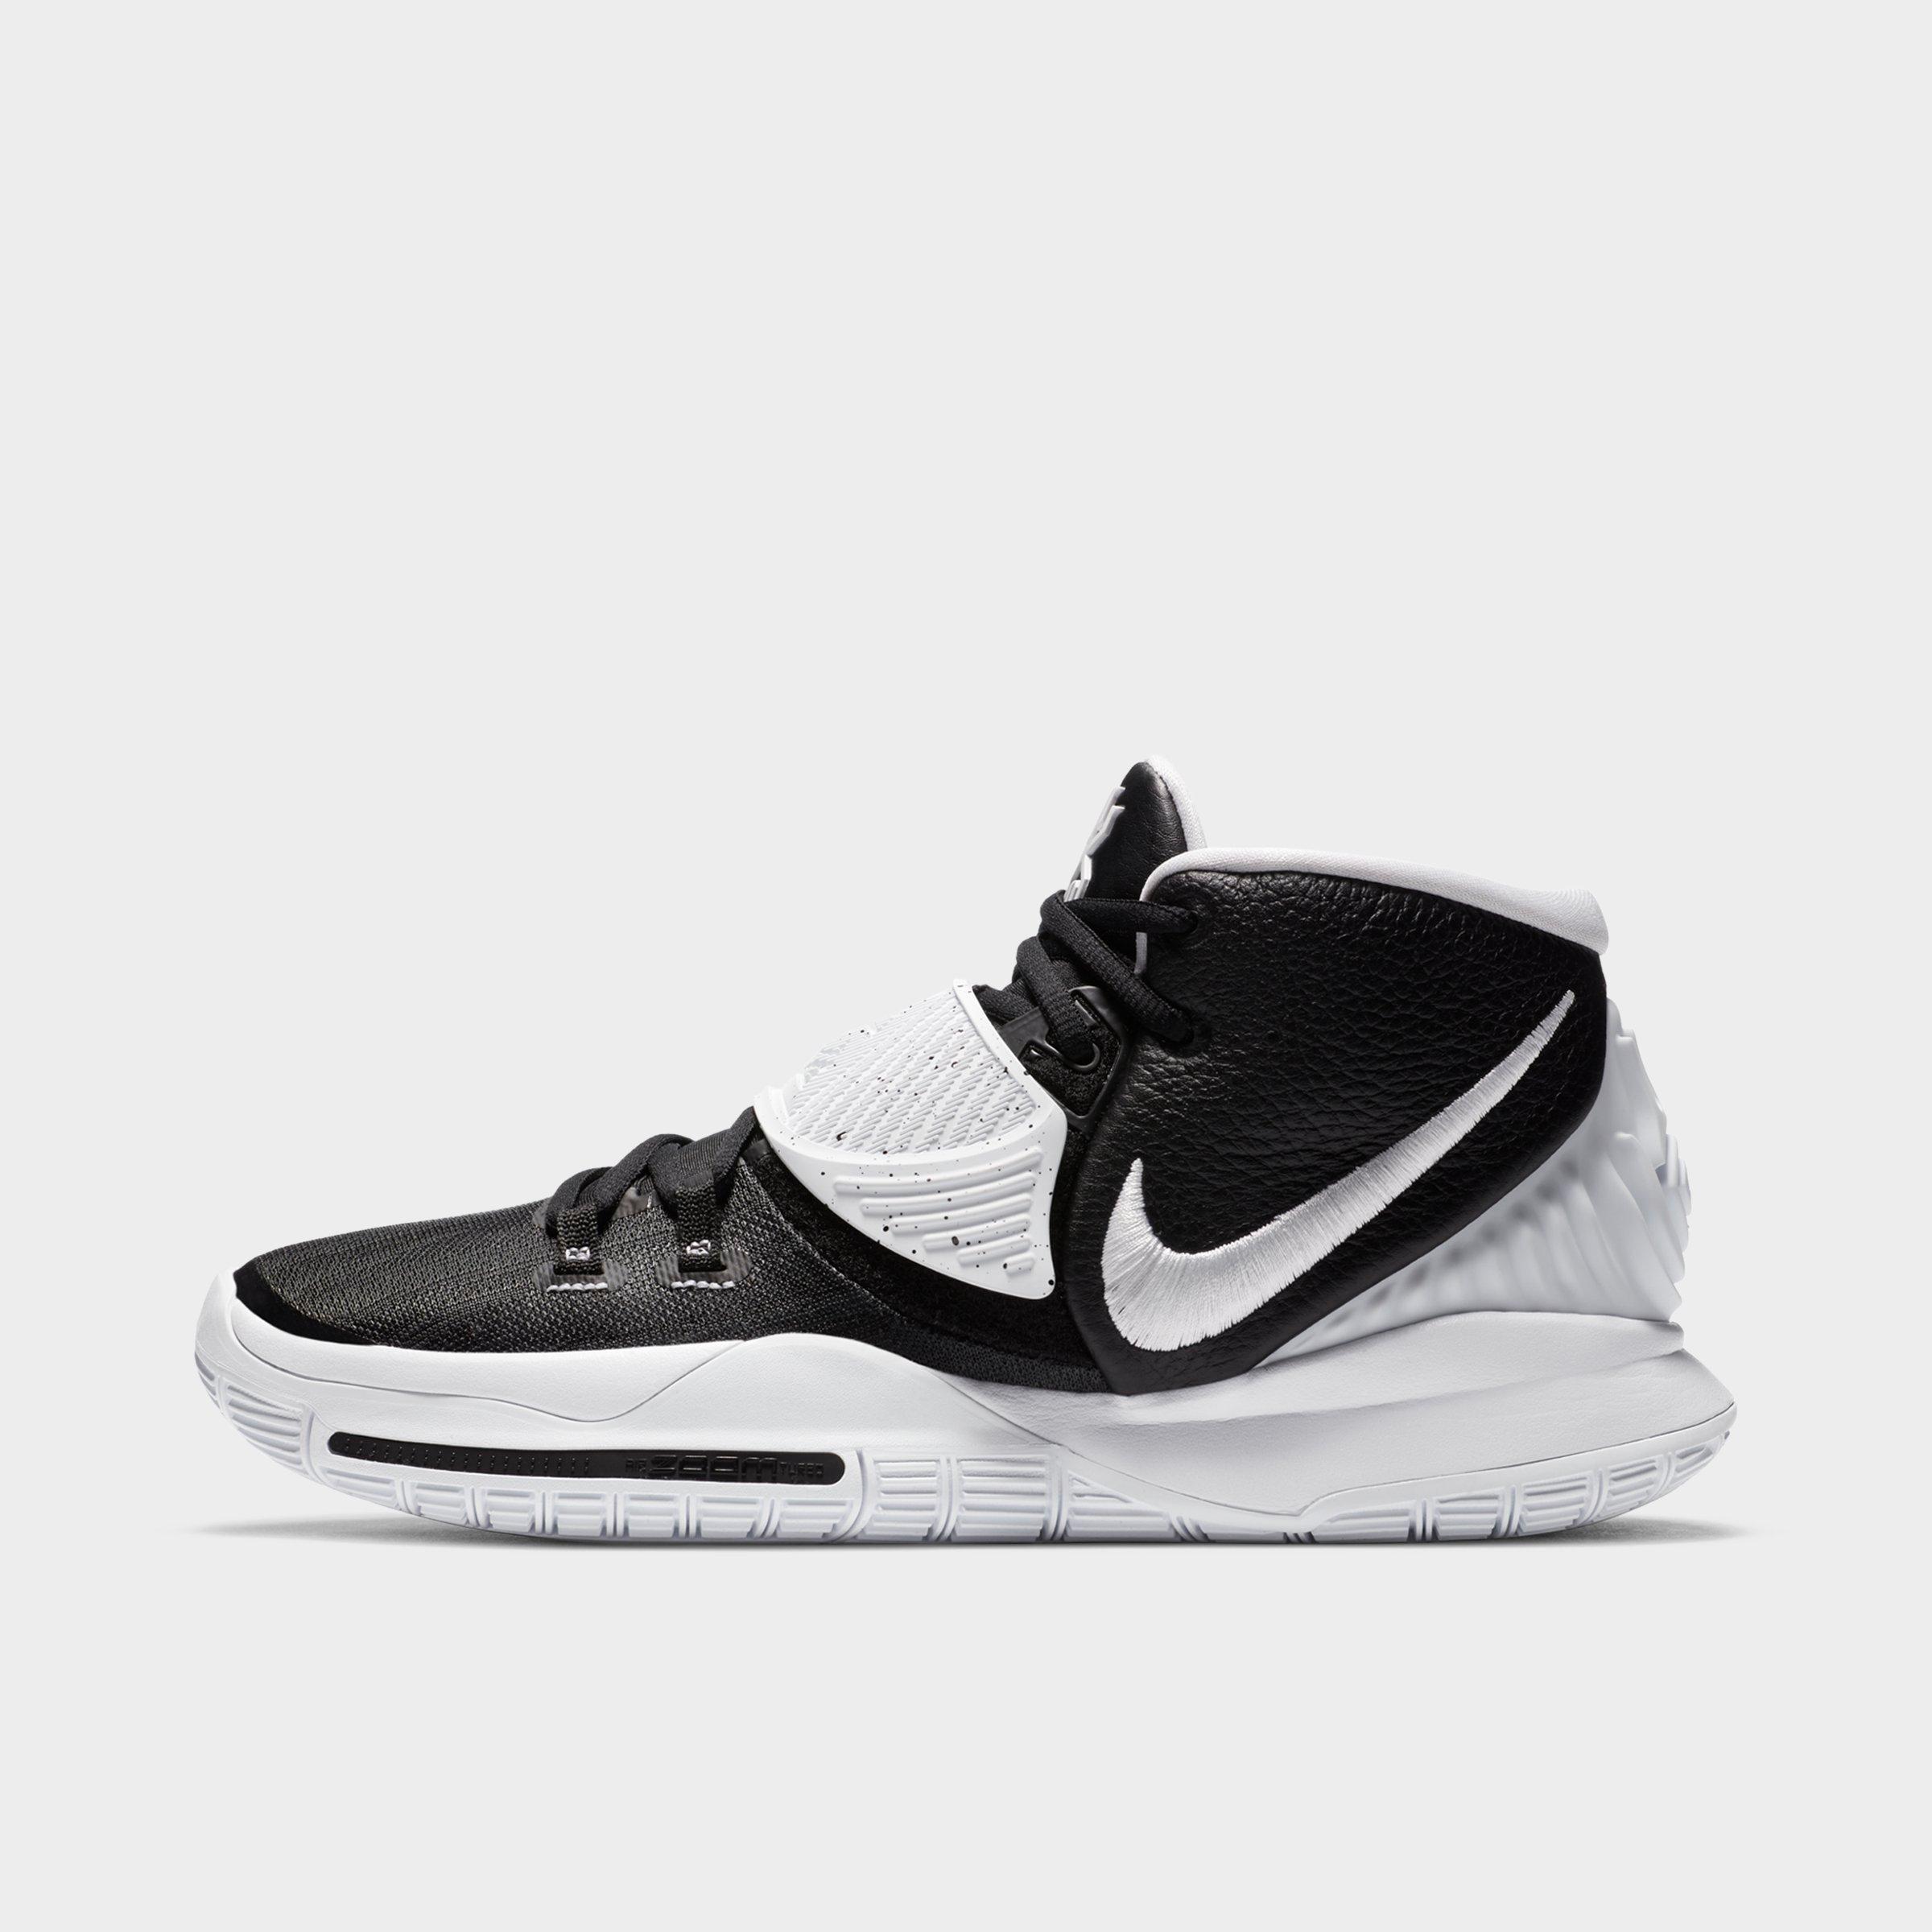 kyrie irving shoe 6